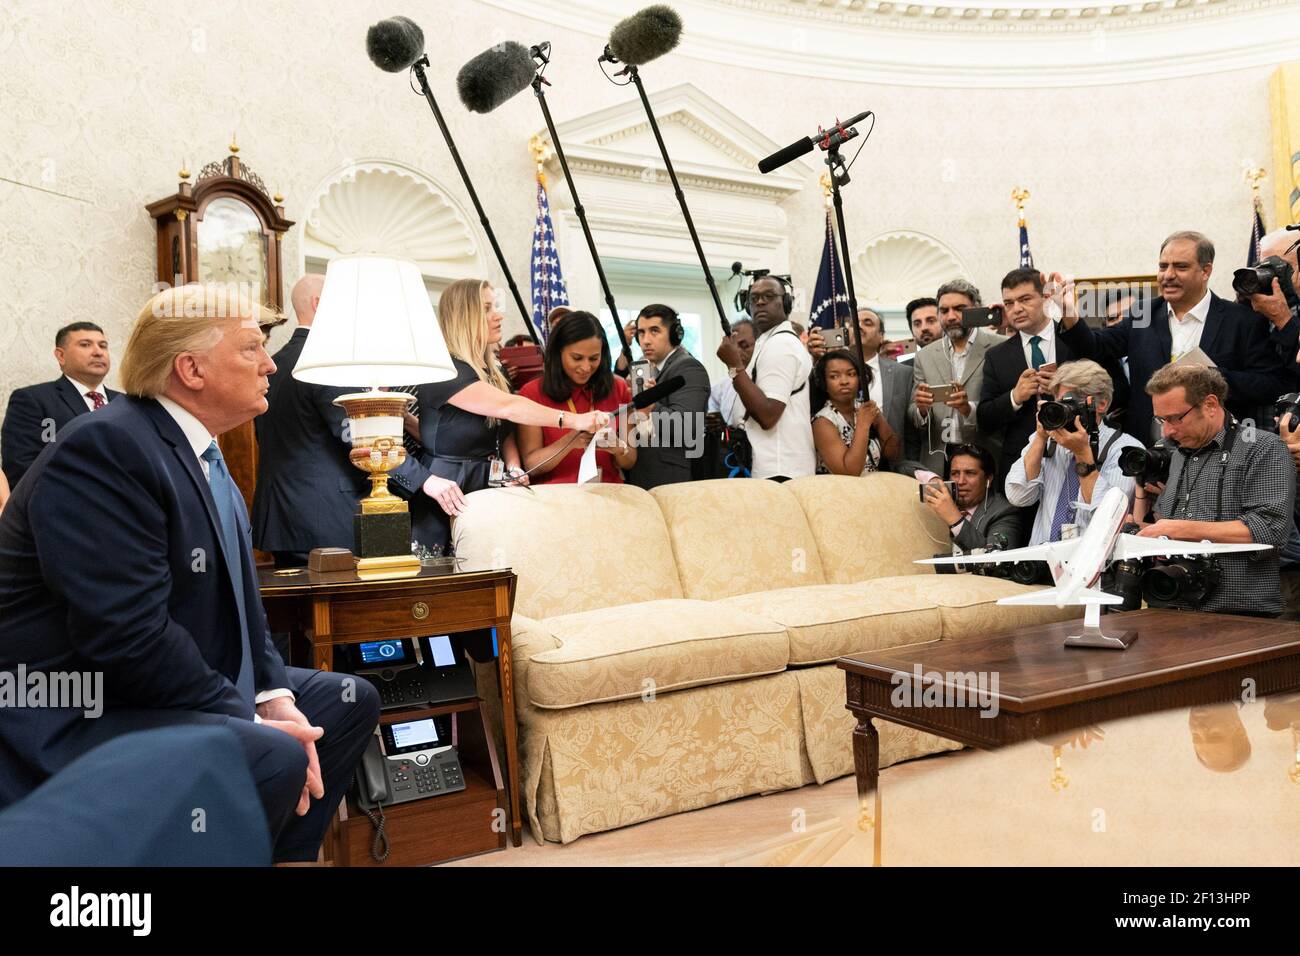 President Donald Trump joined by Prime Minister Imran Khan of the Islamic Republic of Pakistan speaks with reporters during their bilateral meeting Monday July 22 2019 in the Oval Office of the White House. Stock Photo